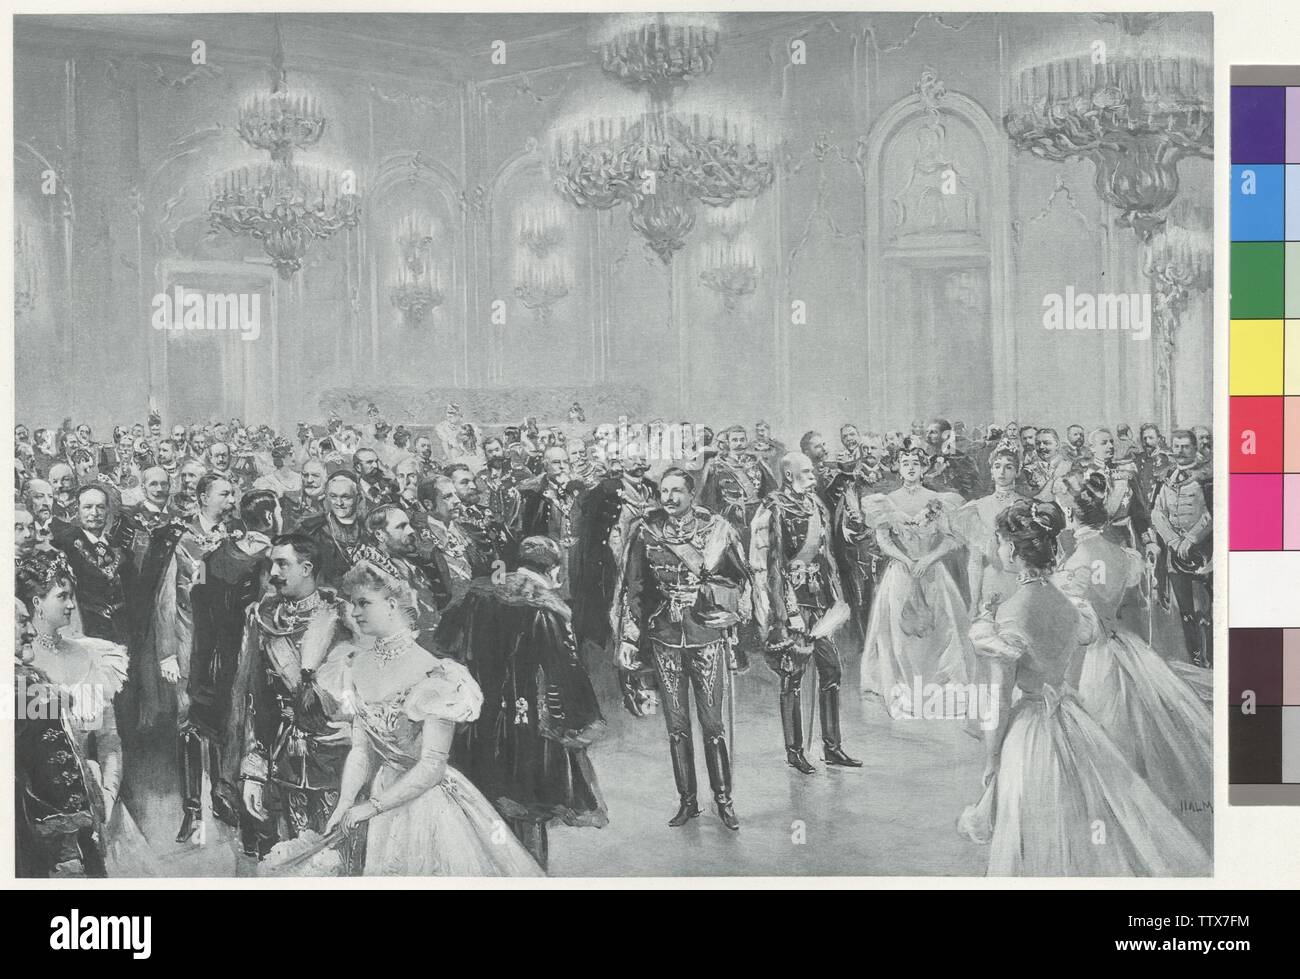 reception at court in the ocassion of the visitation of Emperor Wilhelm II,  reception in the Ofen Castle on 20.9.1897. photoengraving based on painting  by Artur Lajos Halmi from briefcase: "Kaiserbilder", literary